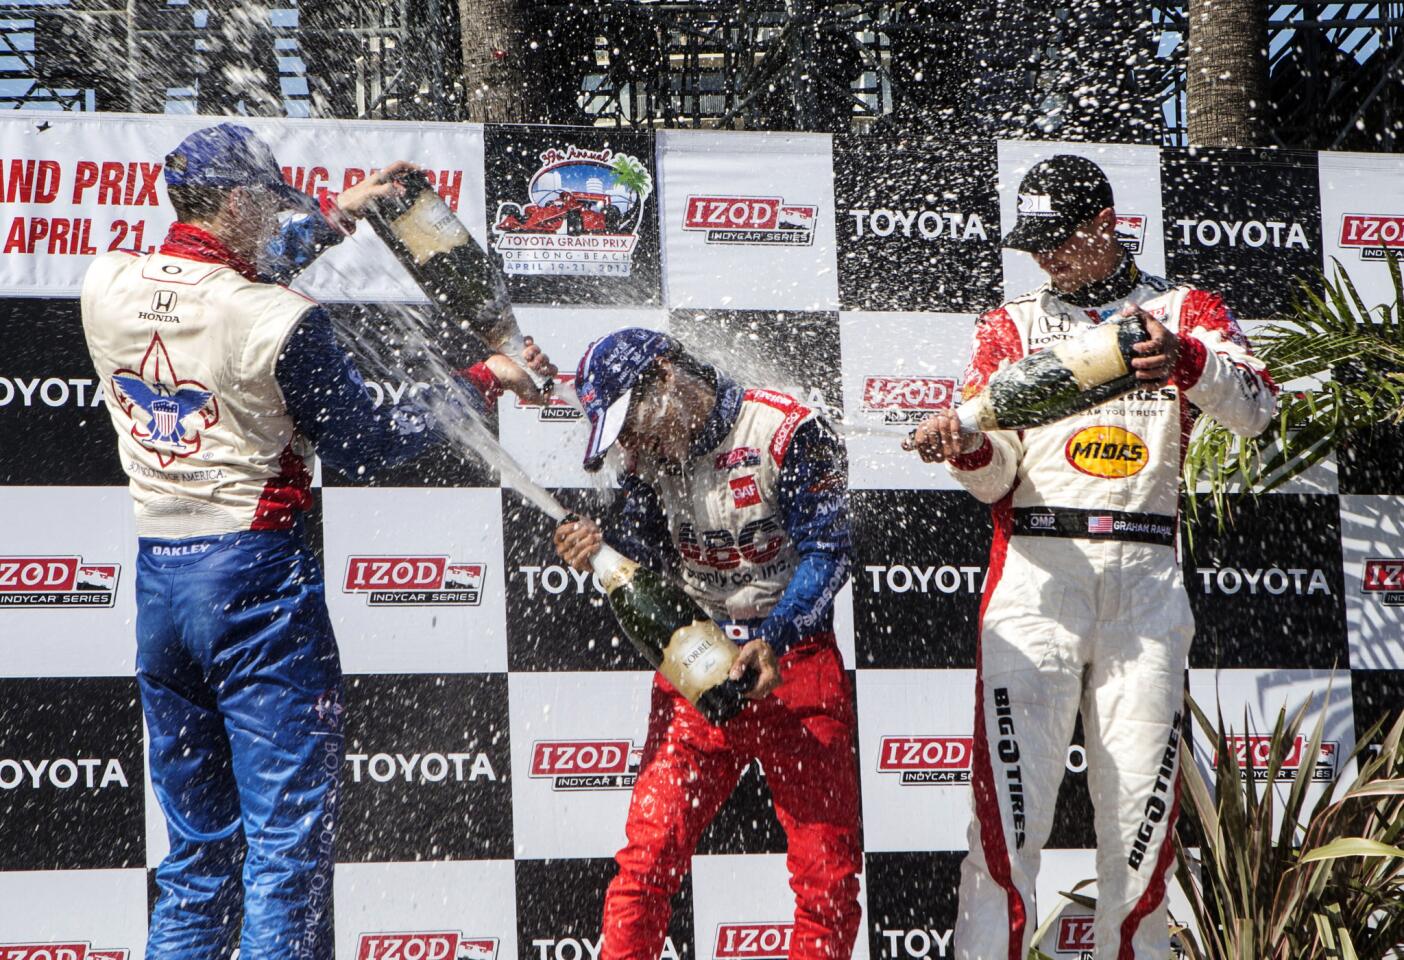 From left, Justin Wilson, Takuma Sato, and Graham Rahal celebrate on the podium after the IndyCar Series Grand Prix of Long Beach auto race.